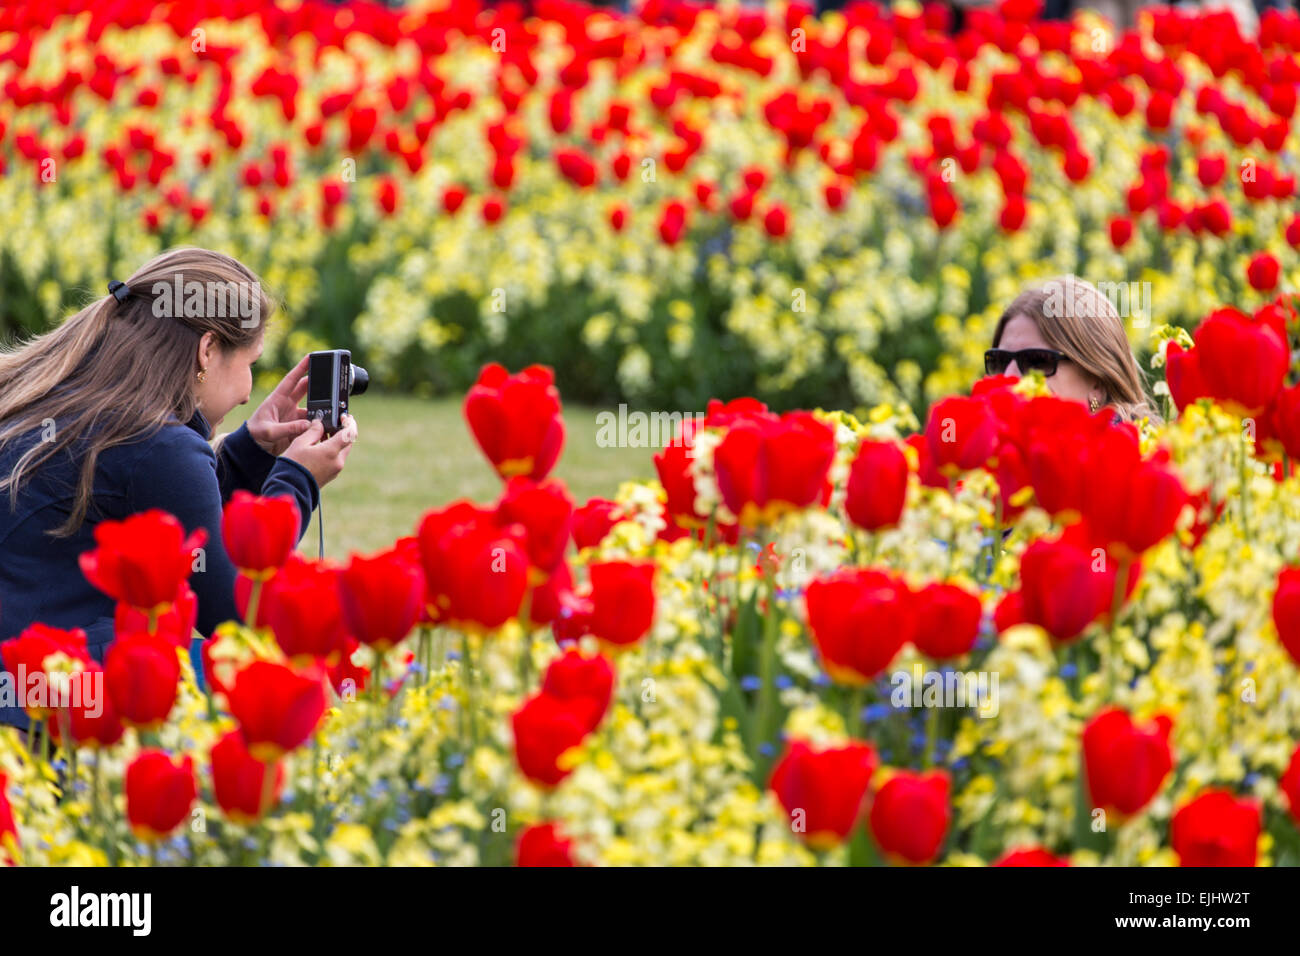 Young woman taking photo of another amid tulips outside Buckingham Palace, London, England Stock Photo